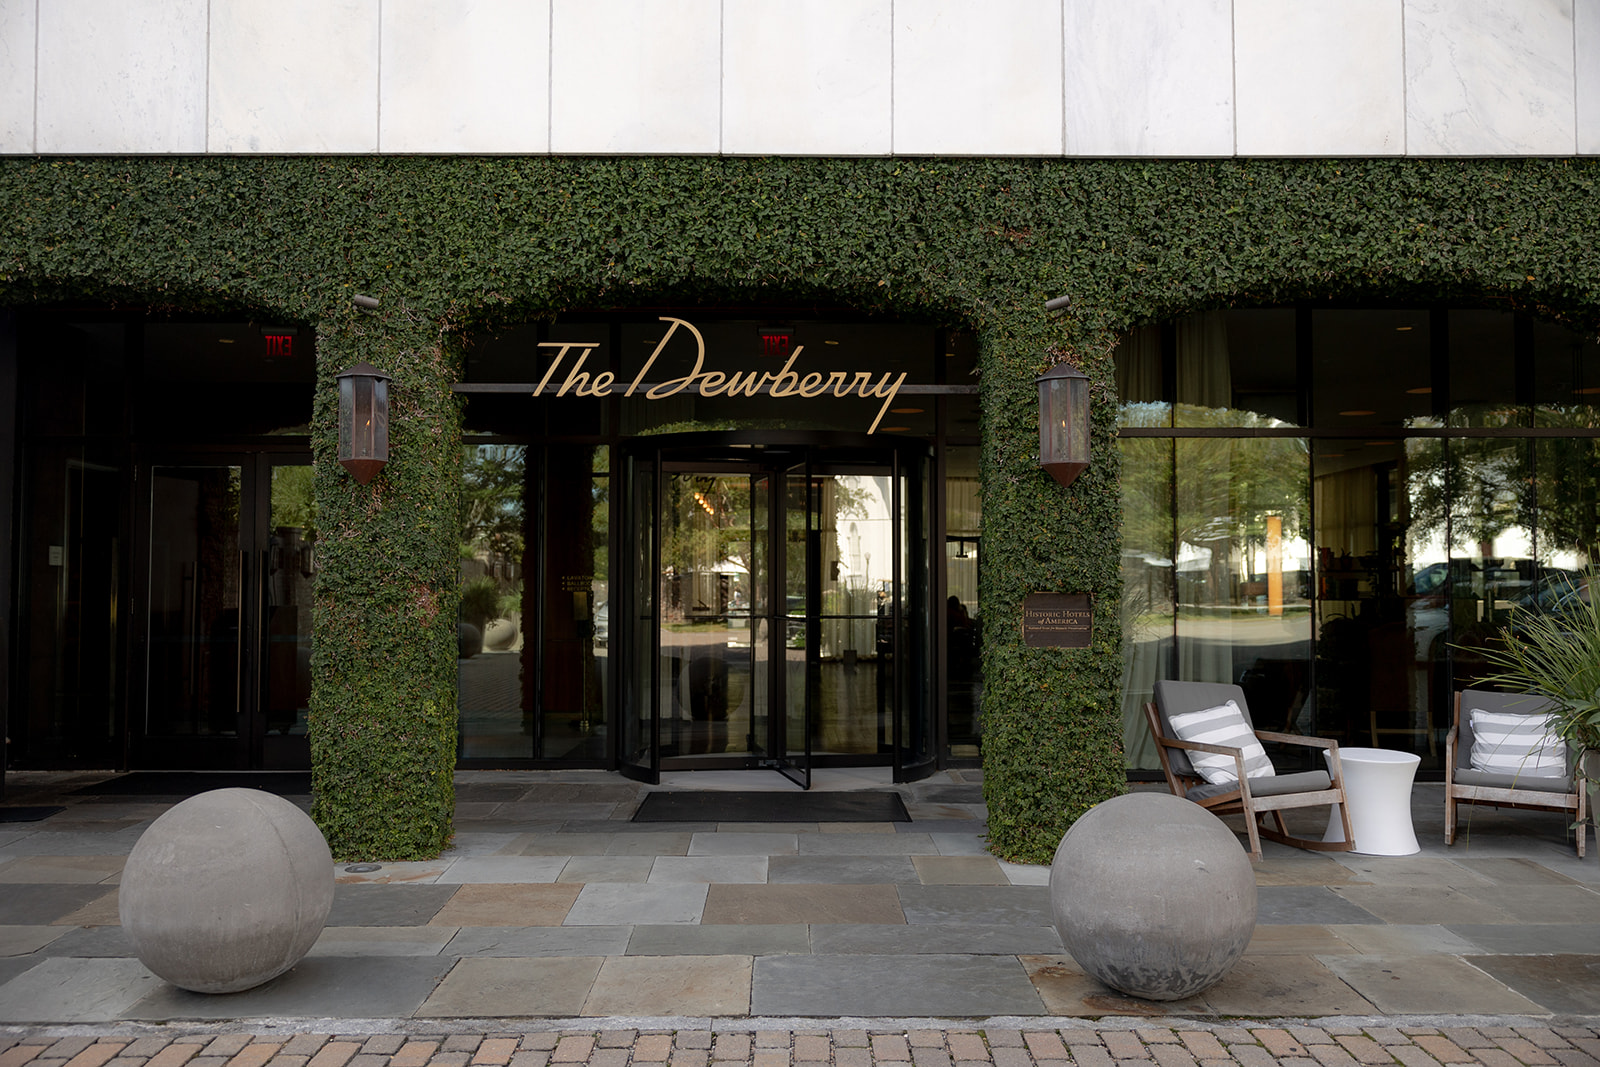 Entrance of the Dewberry hotel with ivy and golden name letters